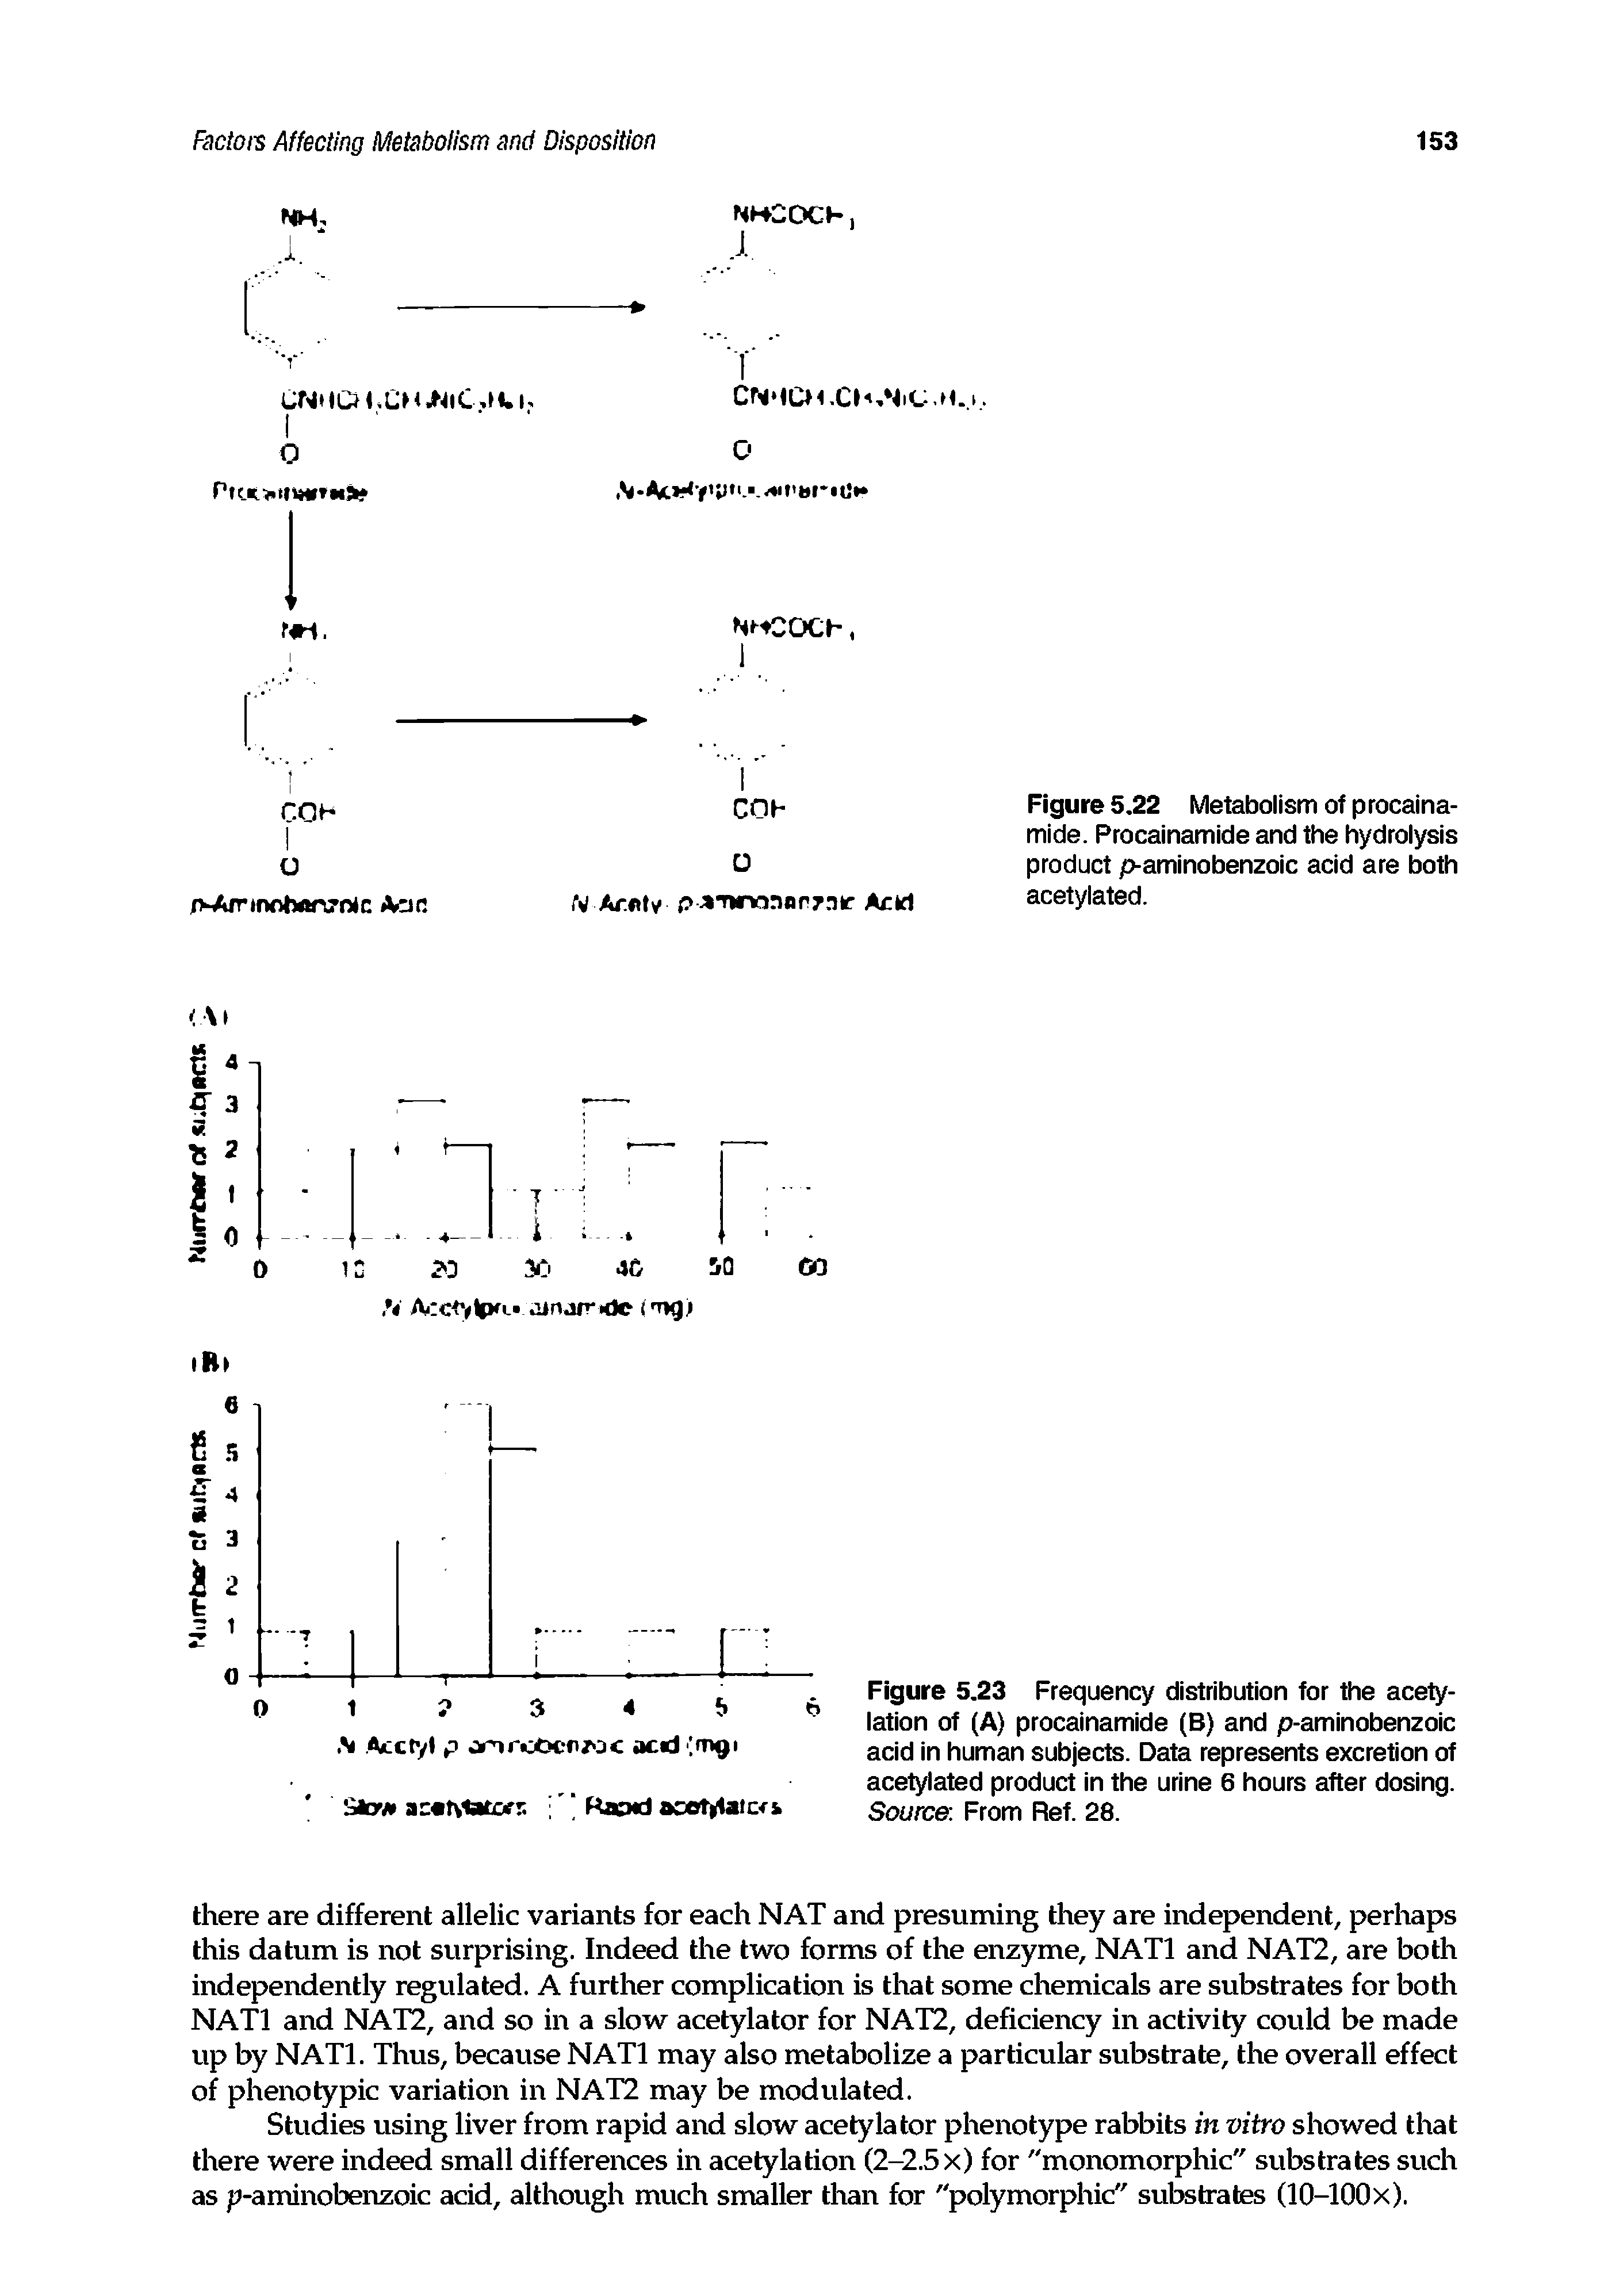 Figure 5.23 Frequency distribution for the acetylation of (A) procainamide (B) and p-aminobenzoic acid in human subjects. Data represents excretion of acetylated product in the urine 6 hours after dosing. Source From Ref. 28.